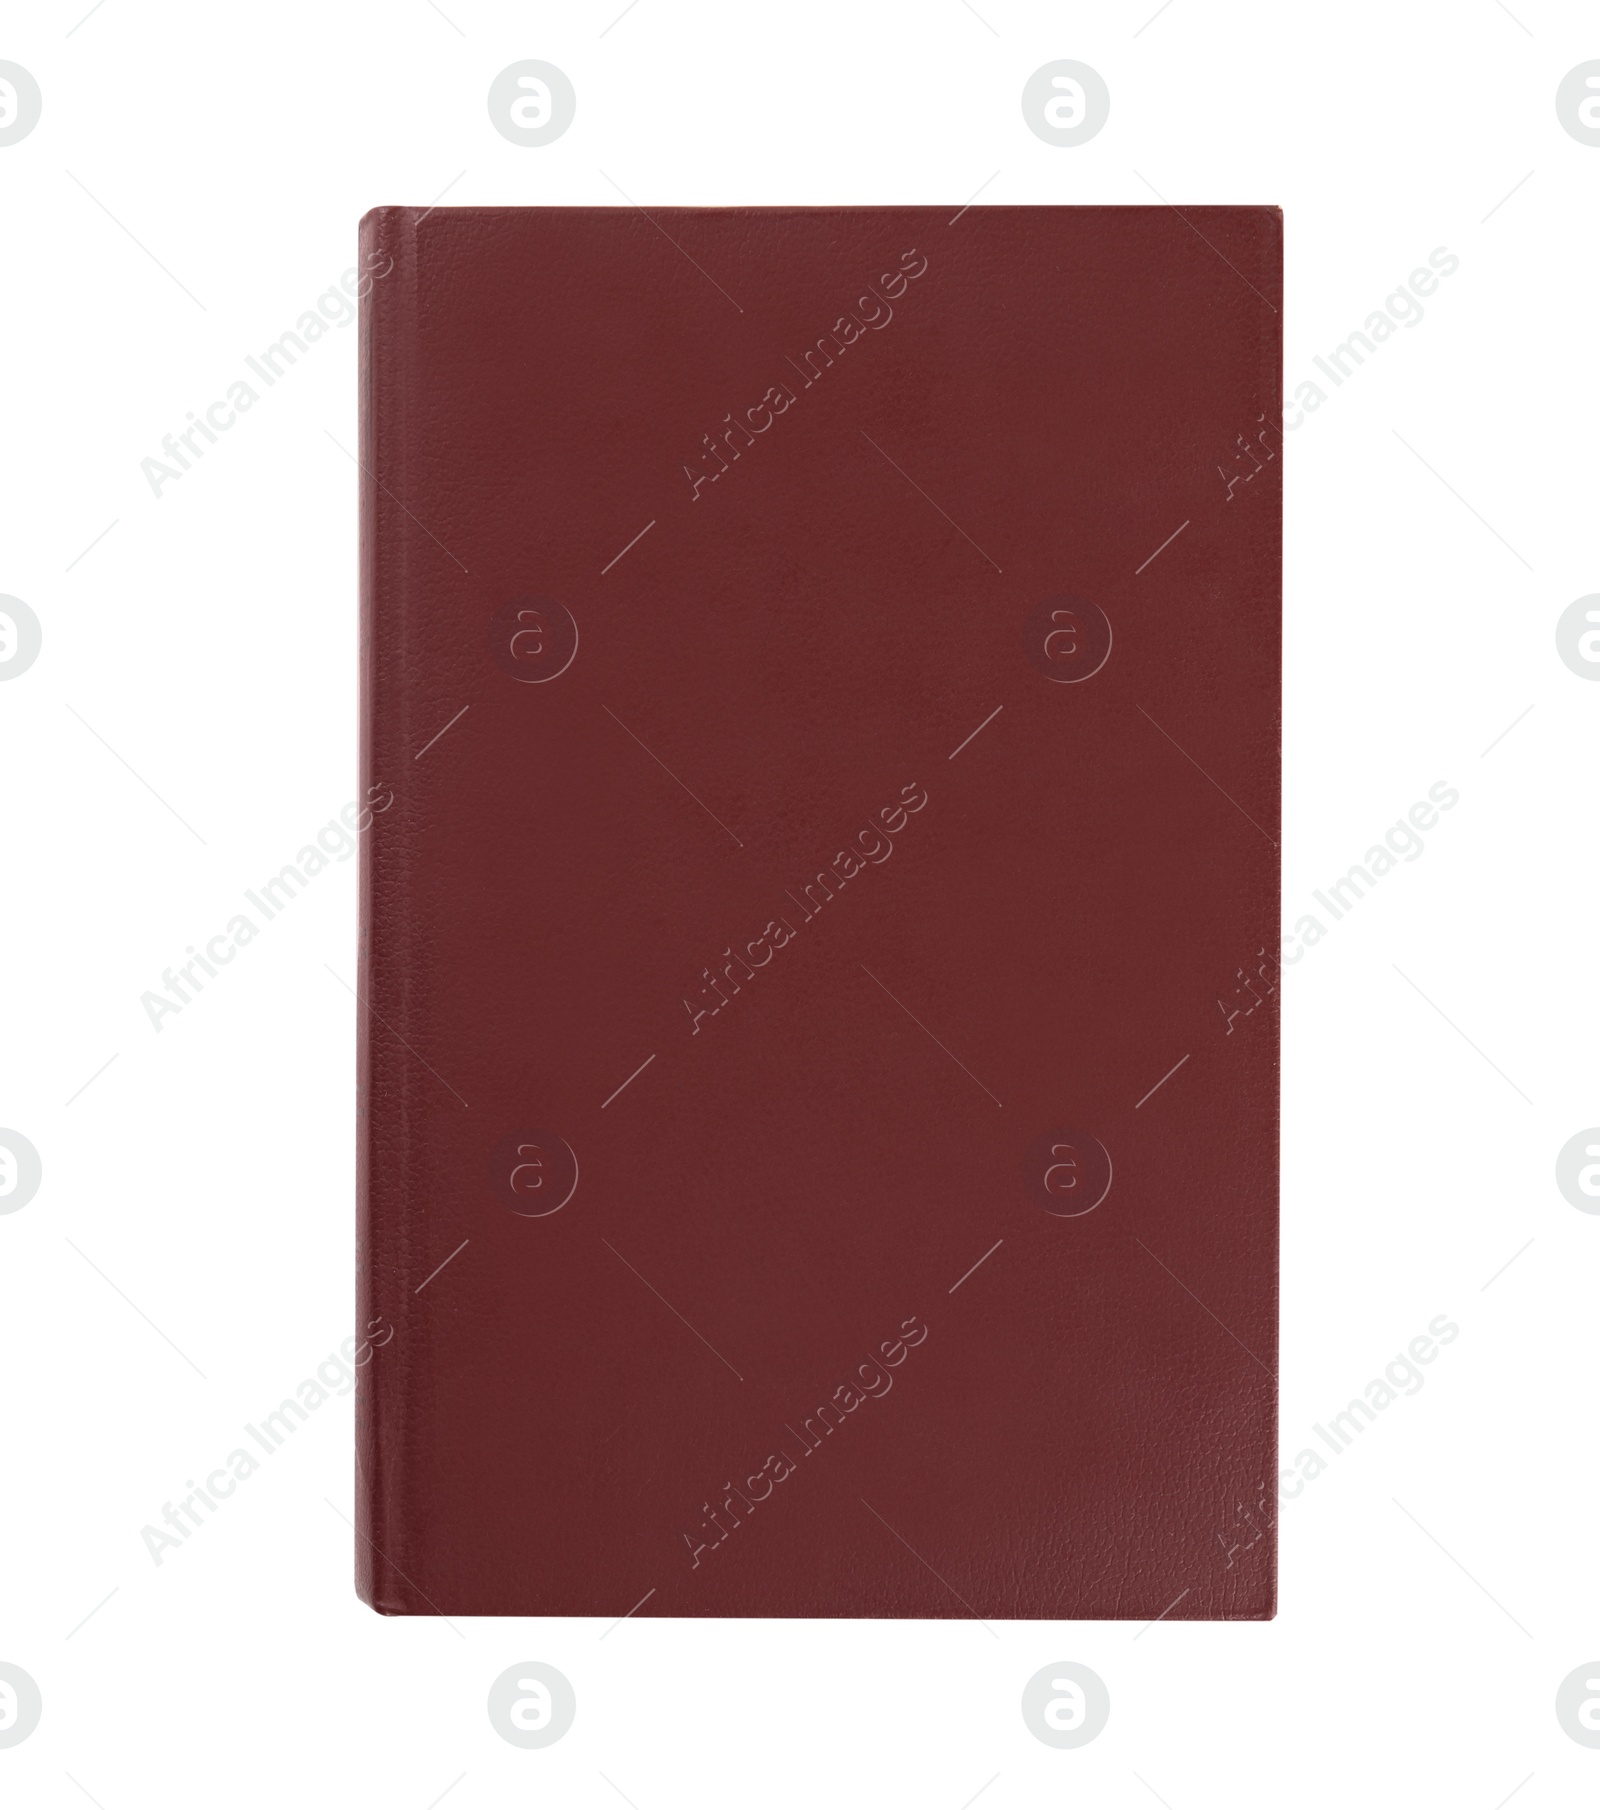 Photo of Closed color hardcover book isolated on white, top view